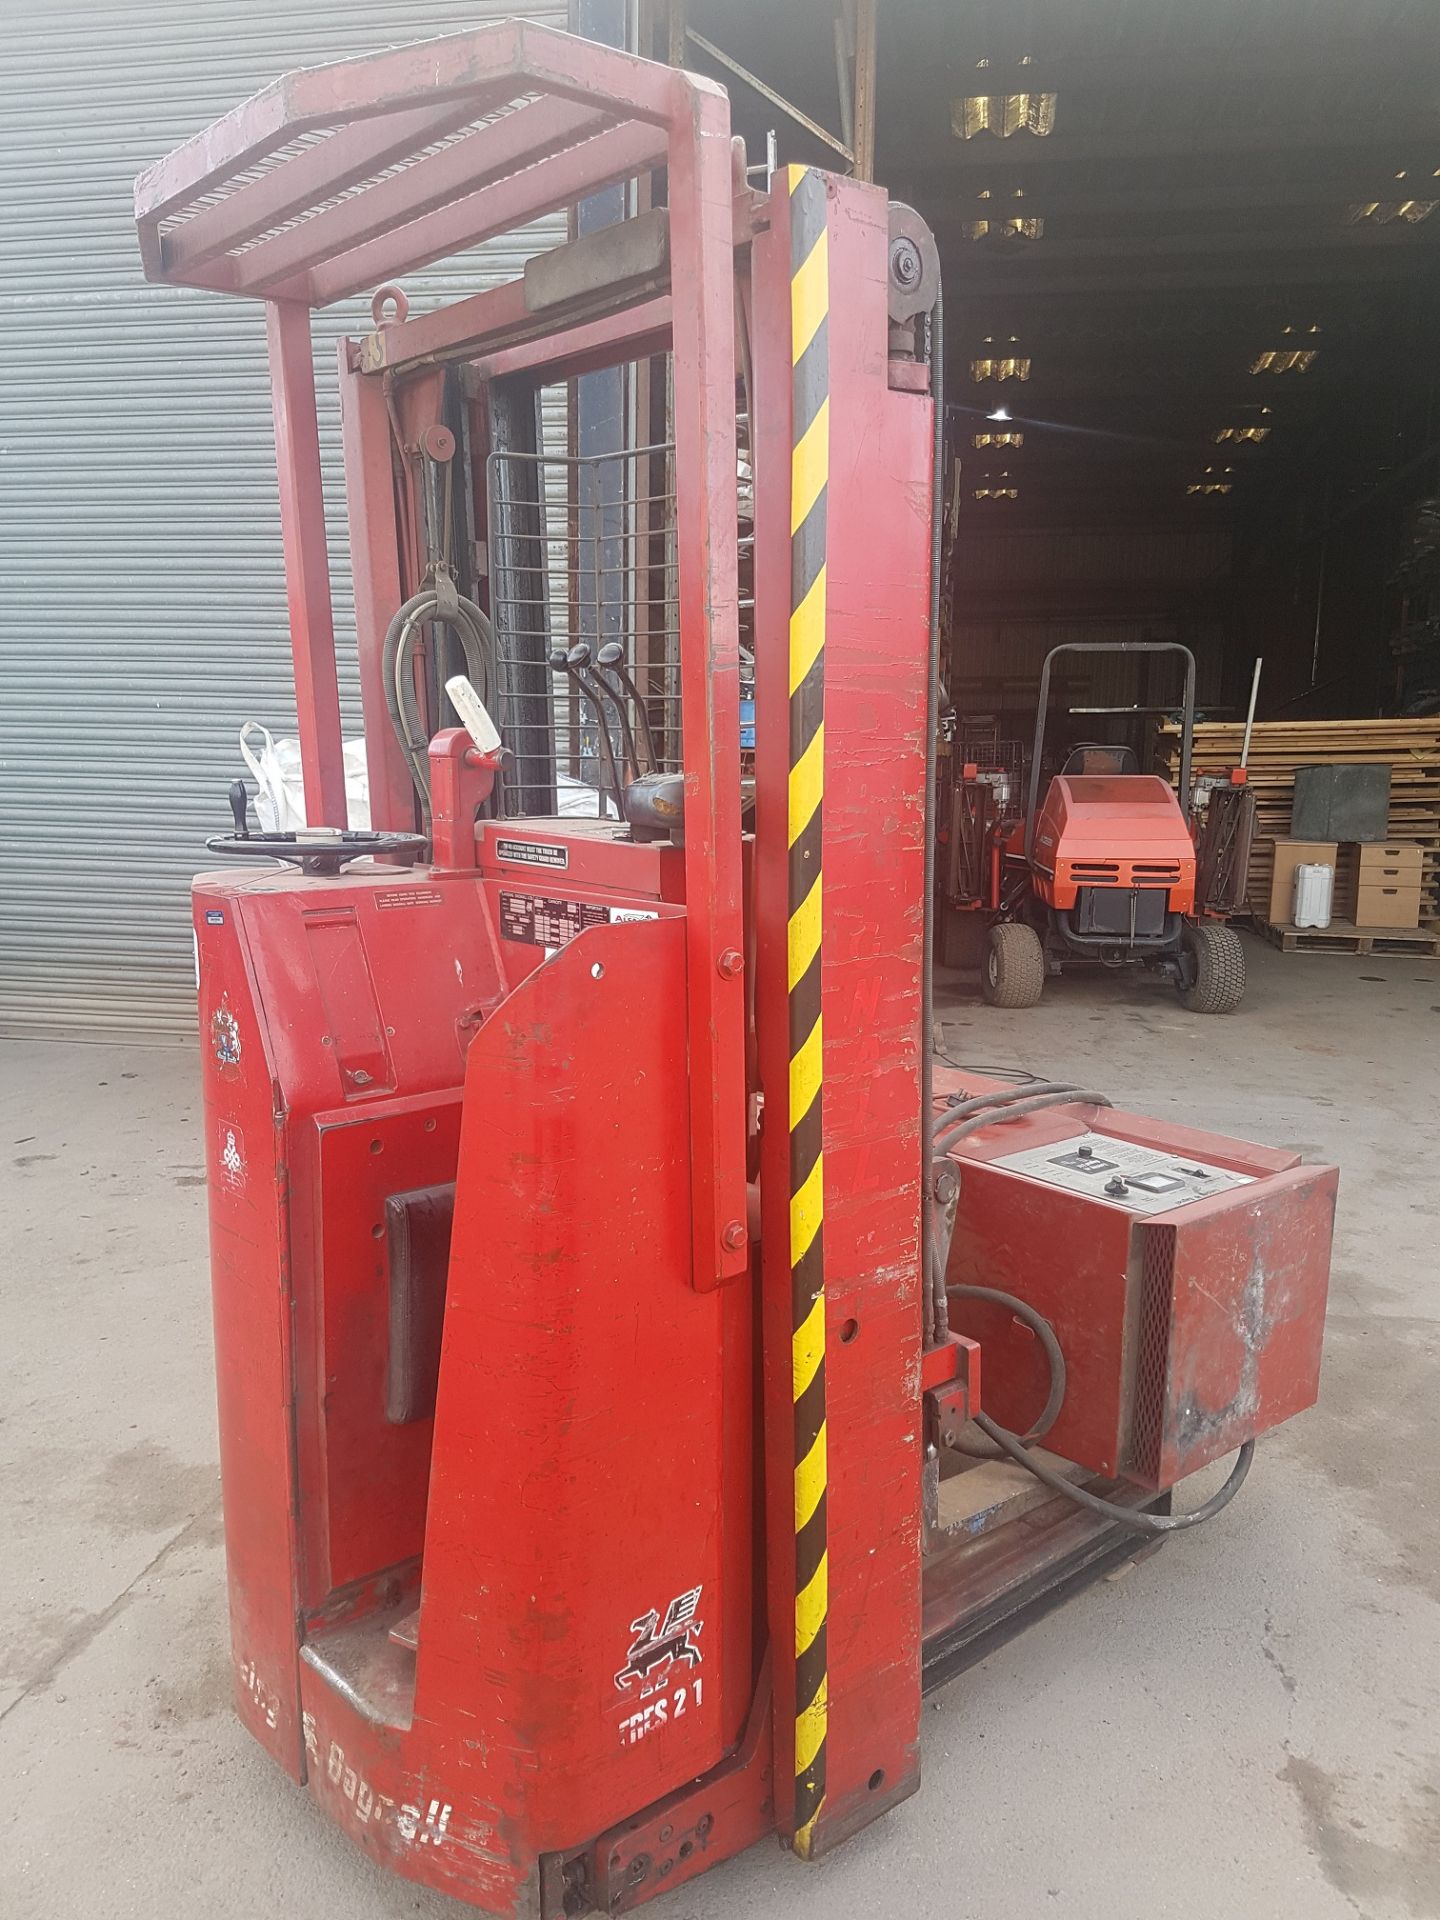 LANSING BAGNALL FRES 21 ELECTRIC FORKLIFT, GOOD BATTERY *PLUS VAT*   BATTERY CHARGER INCLUDED - Image 8 of 18